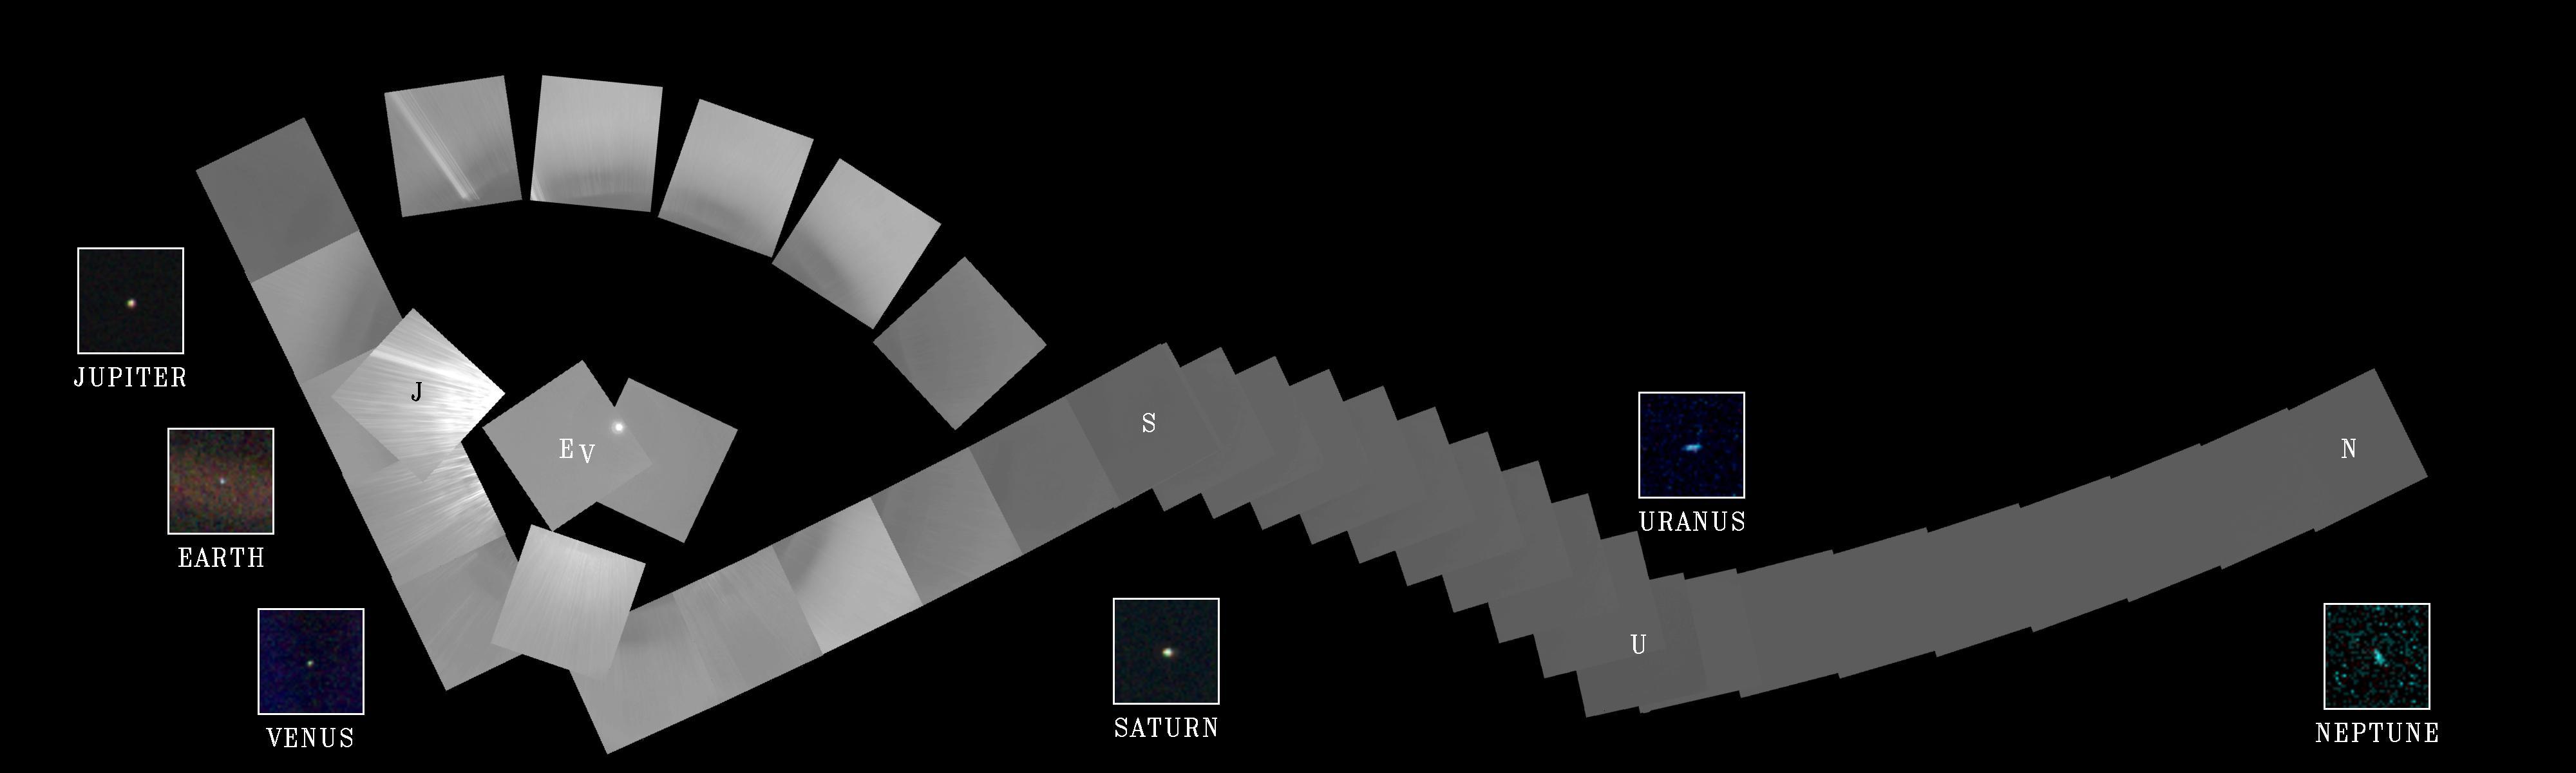  The cameras of Voyager 1 on Feb. 14, 1990, pointed back toward the sun and took a series of pictures of the sun and the planets, making the first ever "portrait" of our solar system as seen from the outside.